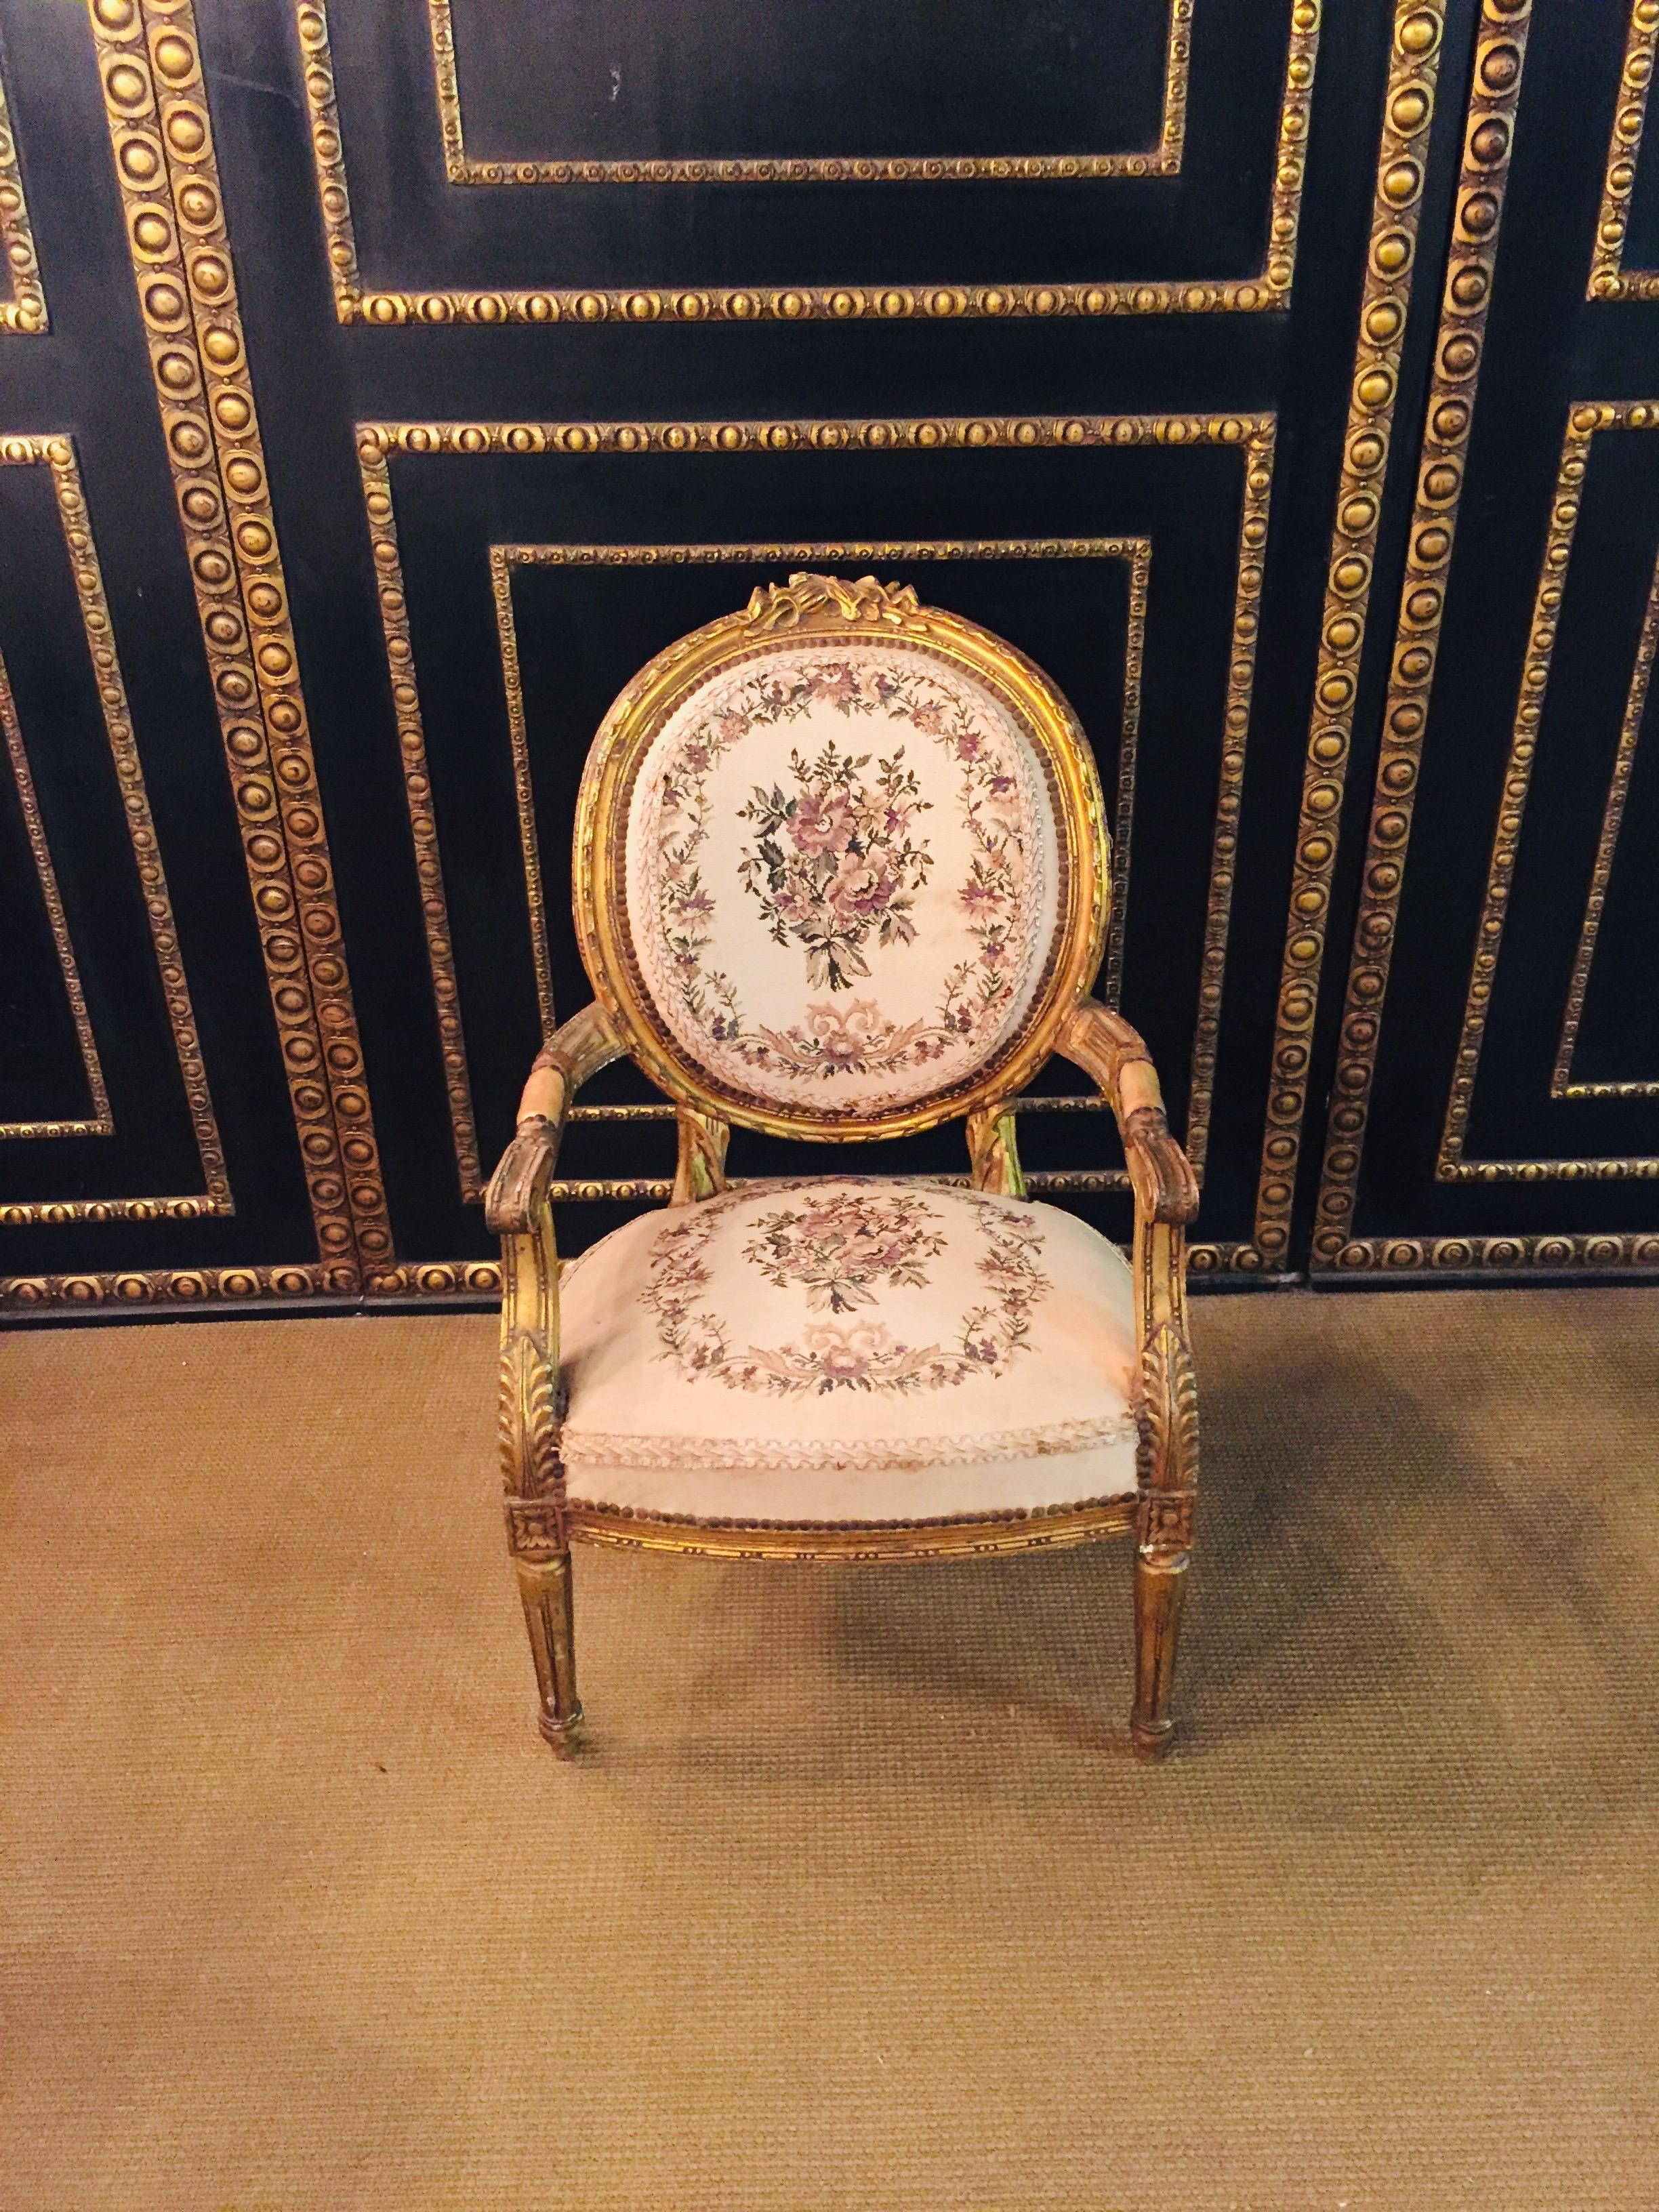 Solid beechwood, set and gilded. Cambered and carved frame on fluted, pointed legs. Curly armrests. Straight supports with applied acanthus leaves. Rising armrests in oval back frame ending in carved Rocaillenbekrönung. Seat and backrest are